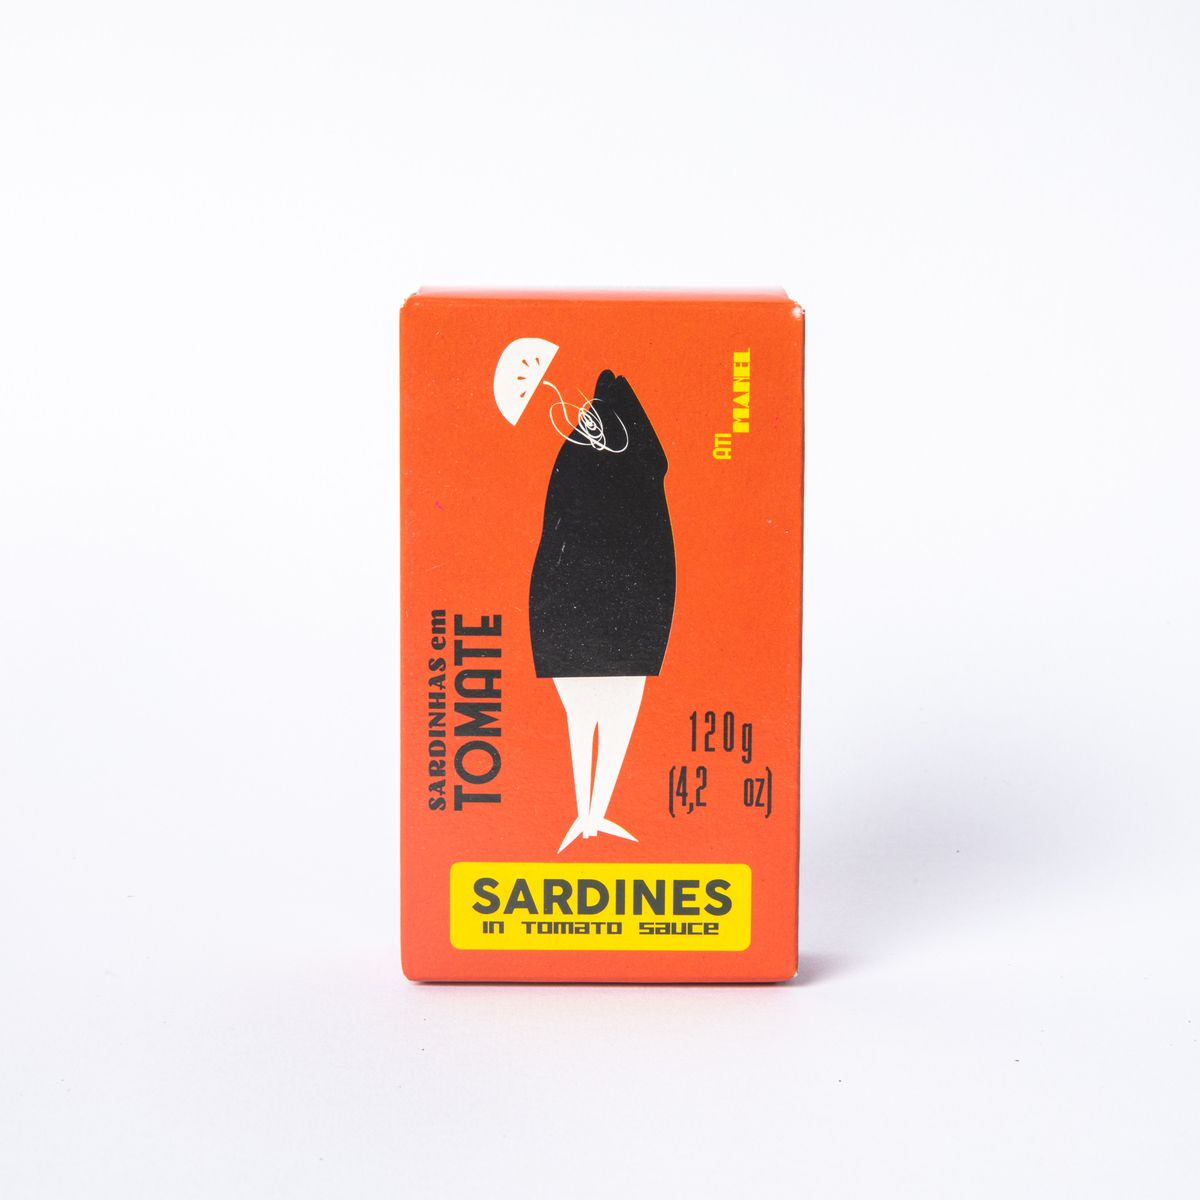 An orange box with a fish illustration and text that reads: "Sardines in Tomato Sauce"